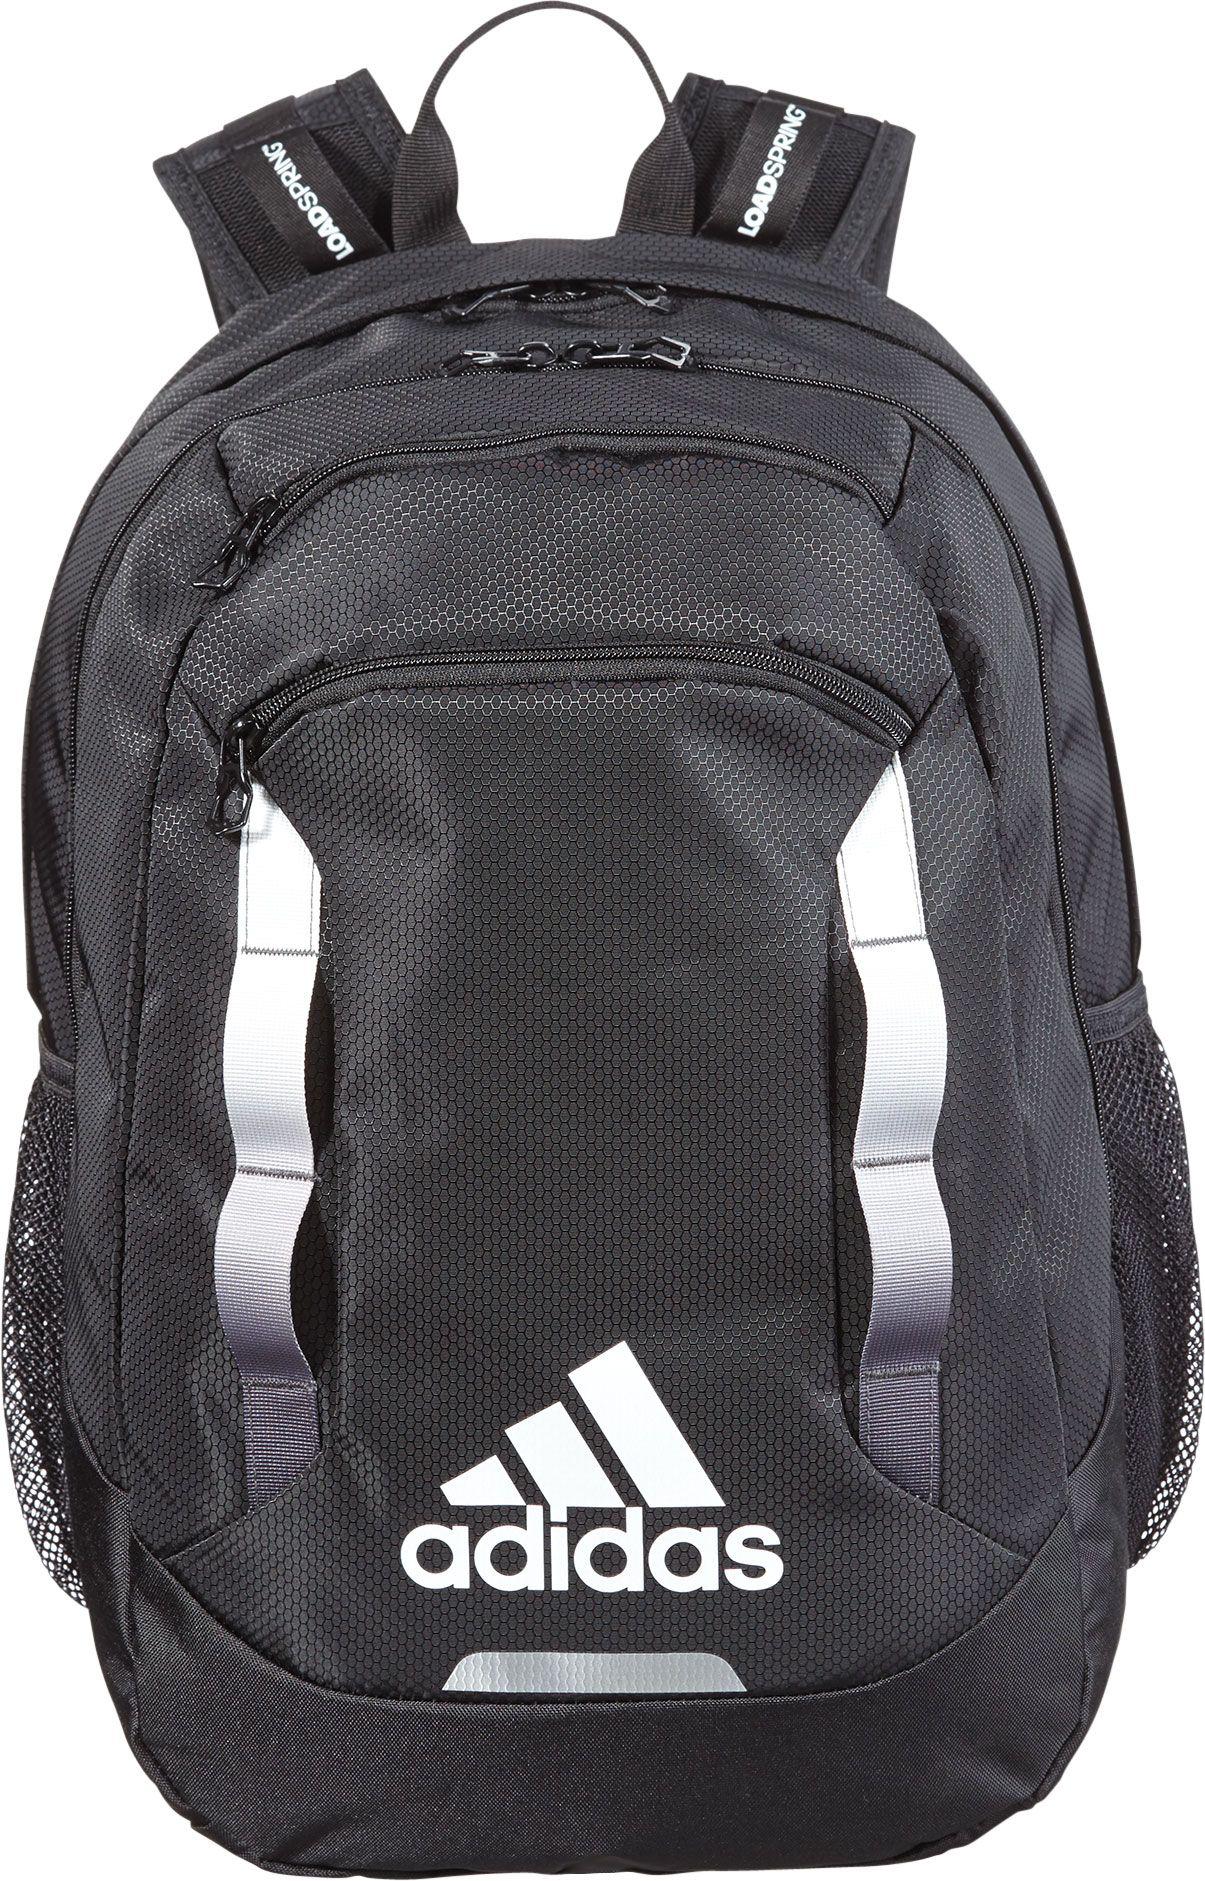 adidas rival xl backpack white